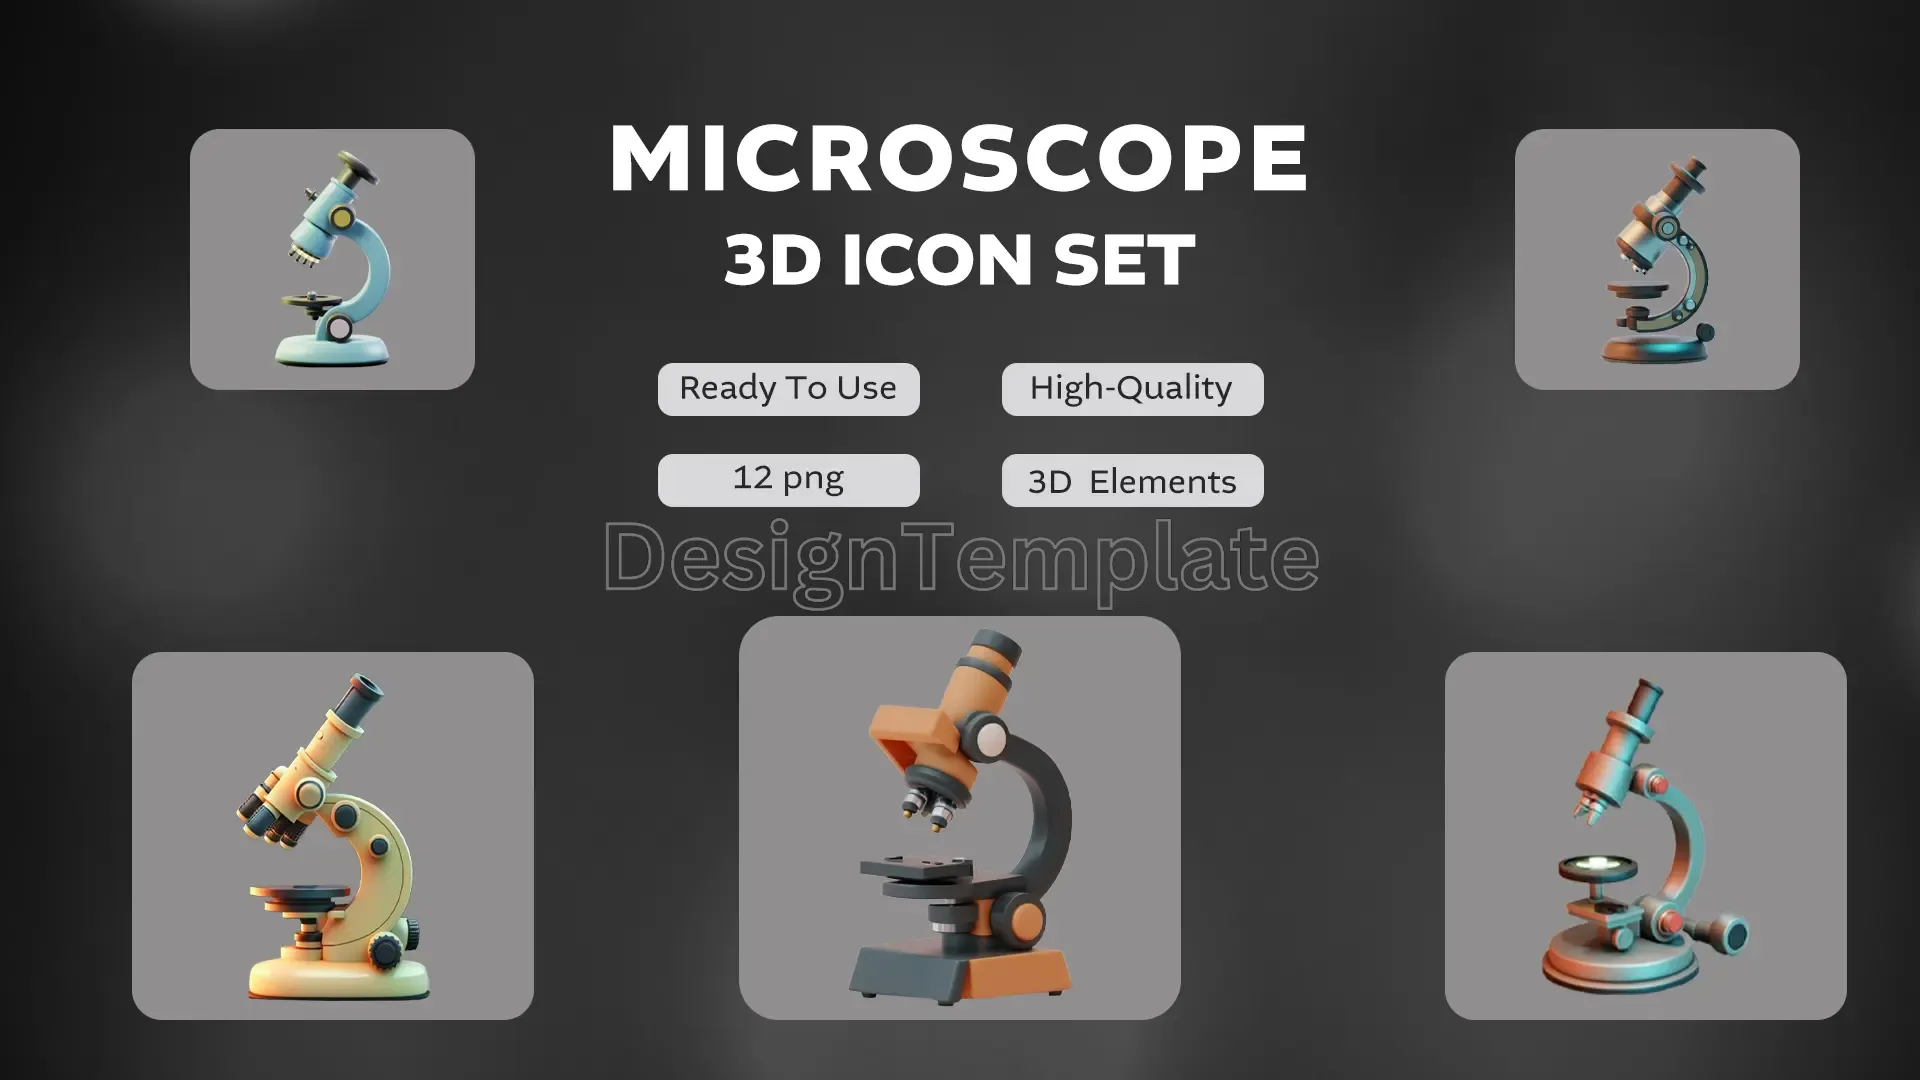 Laboratory Essentials 3D Icons of Microscopes